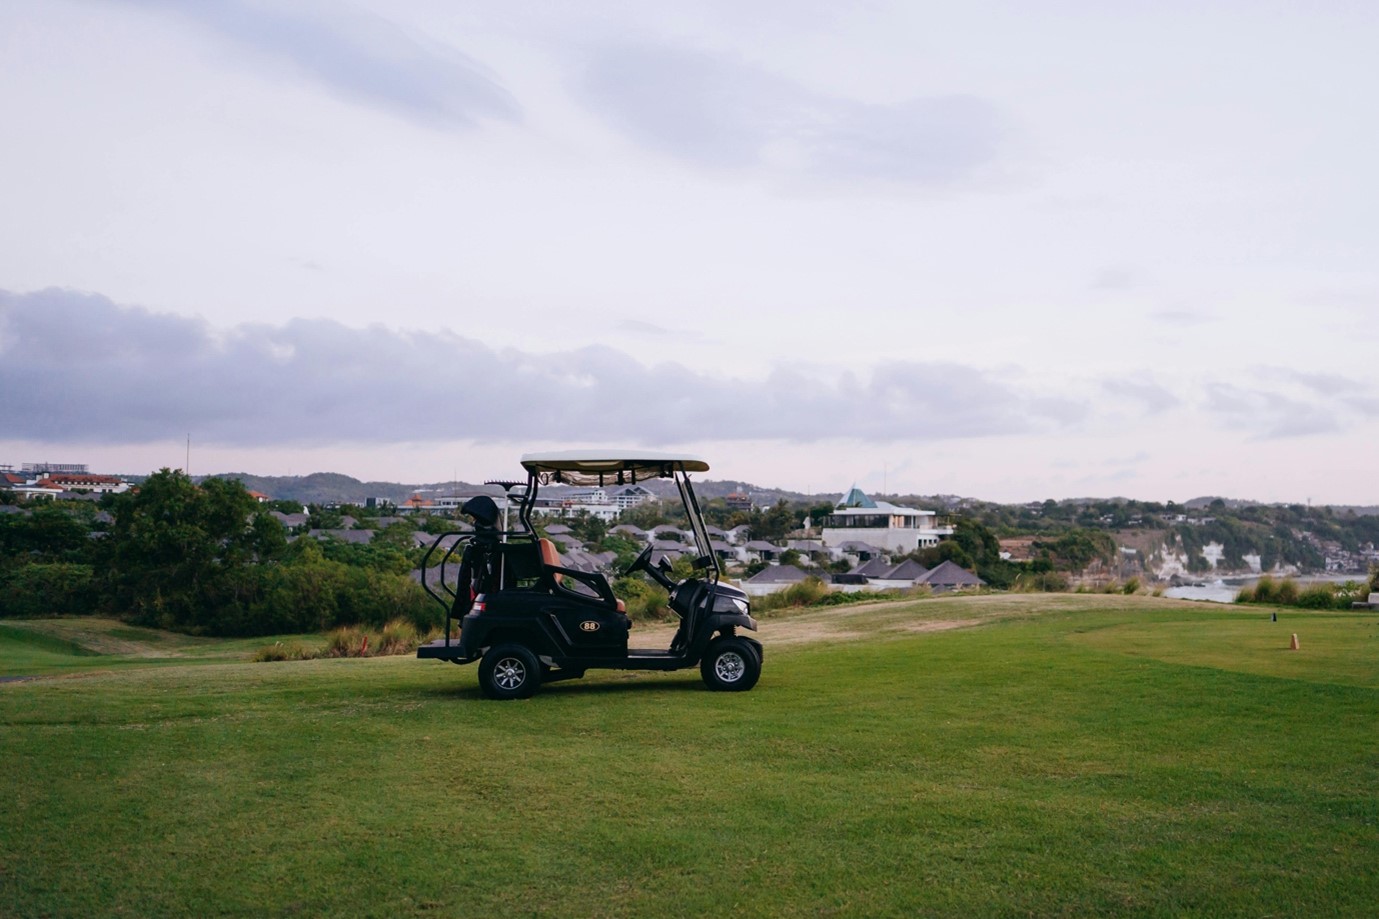 A black golf cart secluded on the course